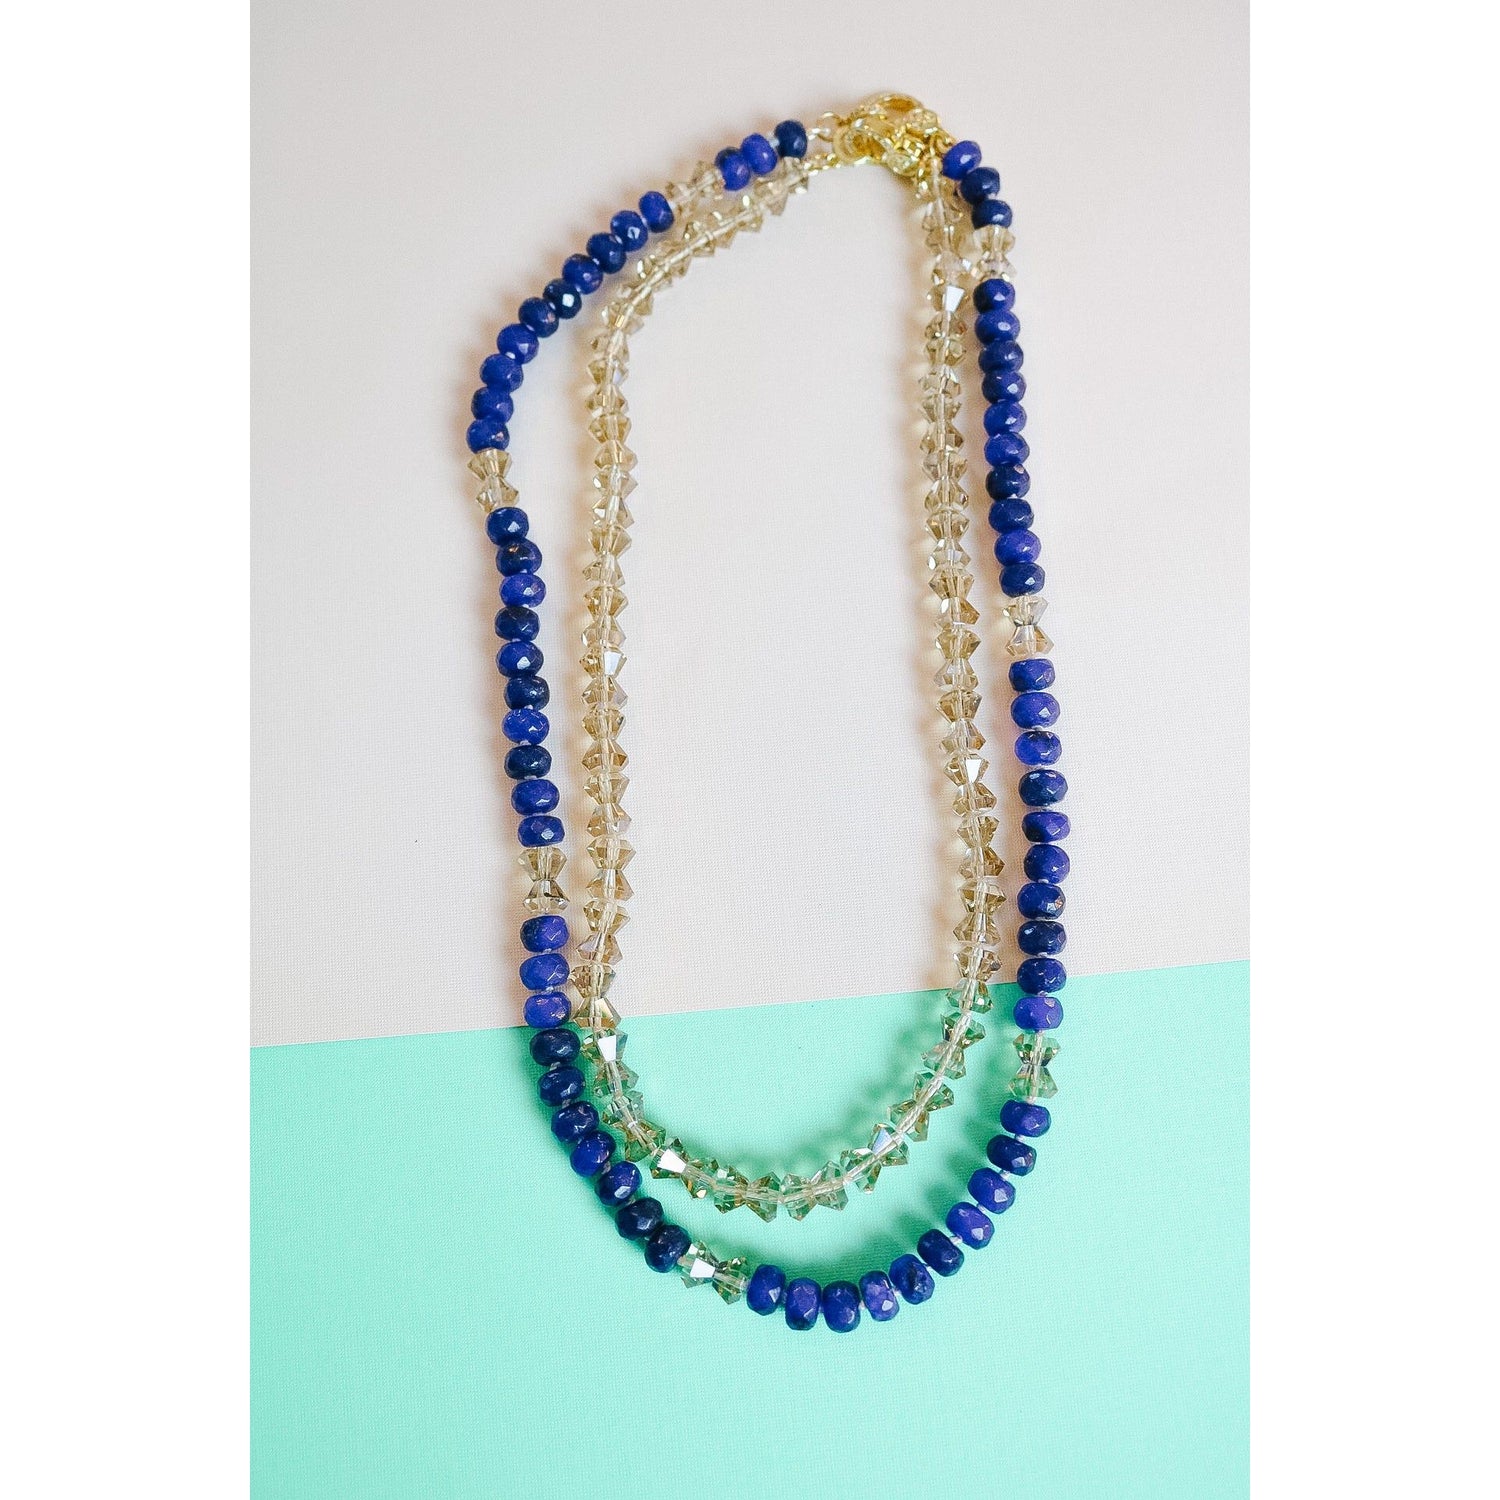 Lapis crystal bow necklace shown with the crystal bow hand knotted necklace